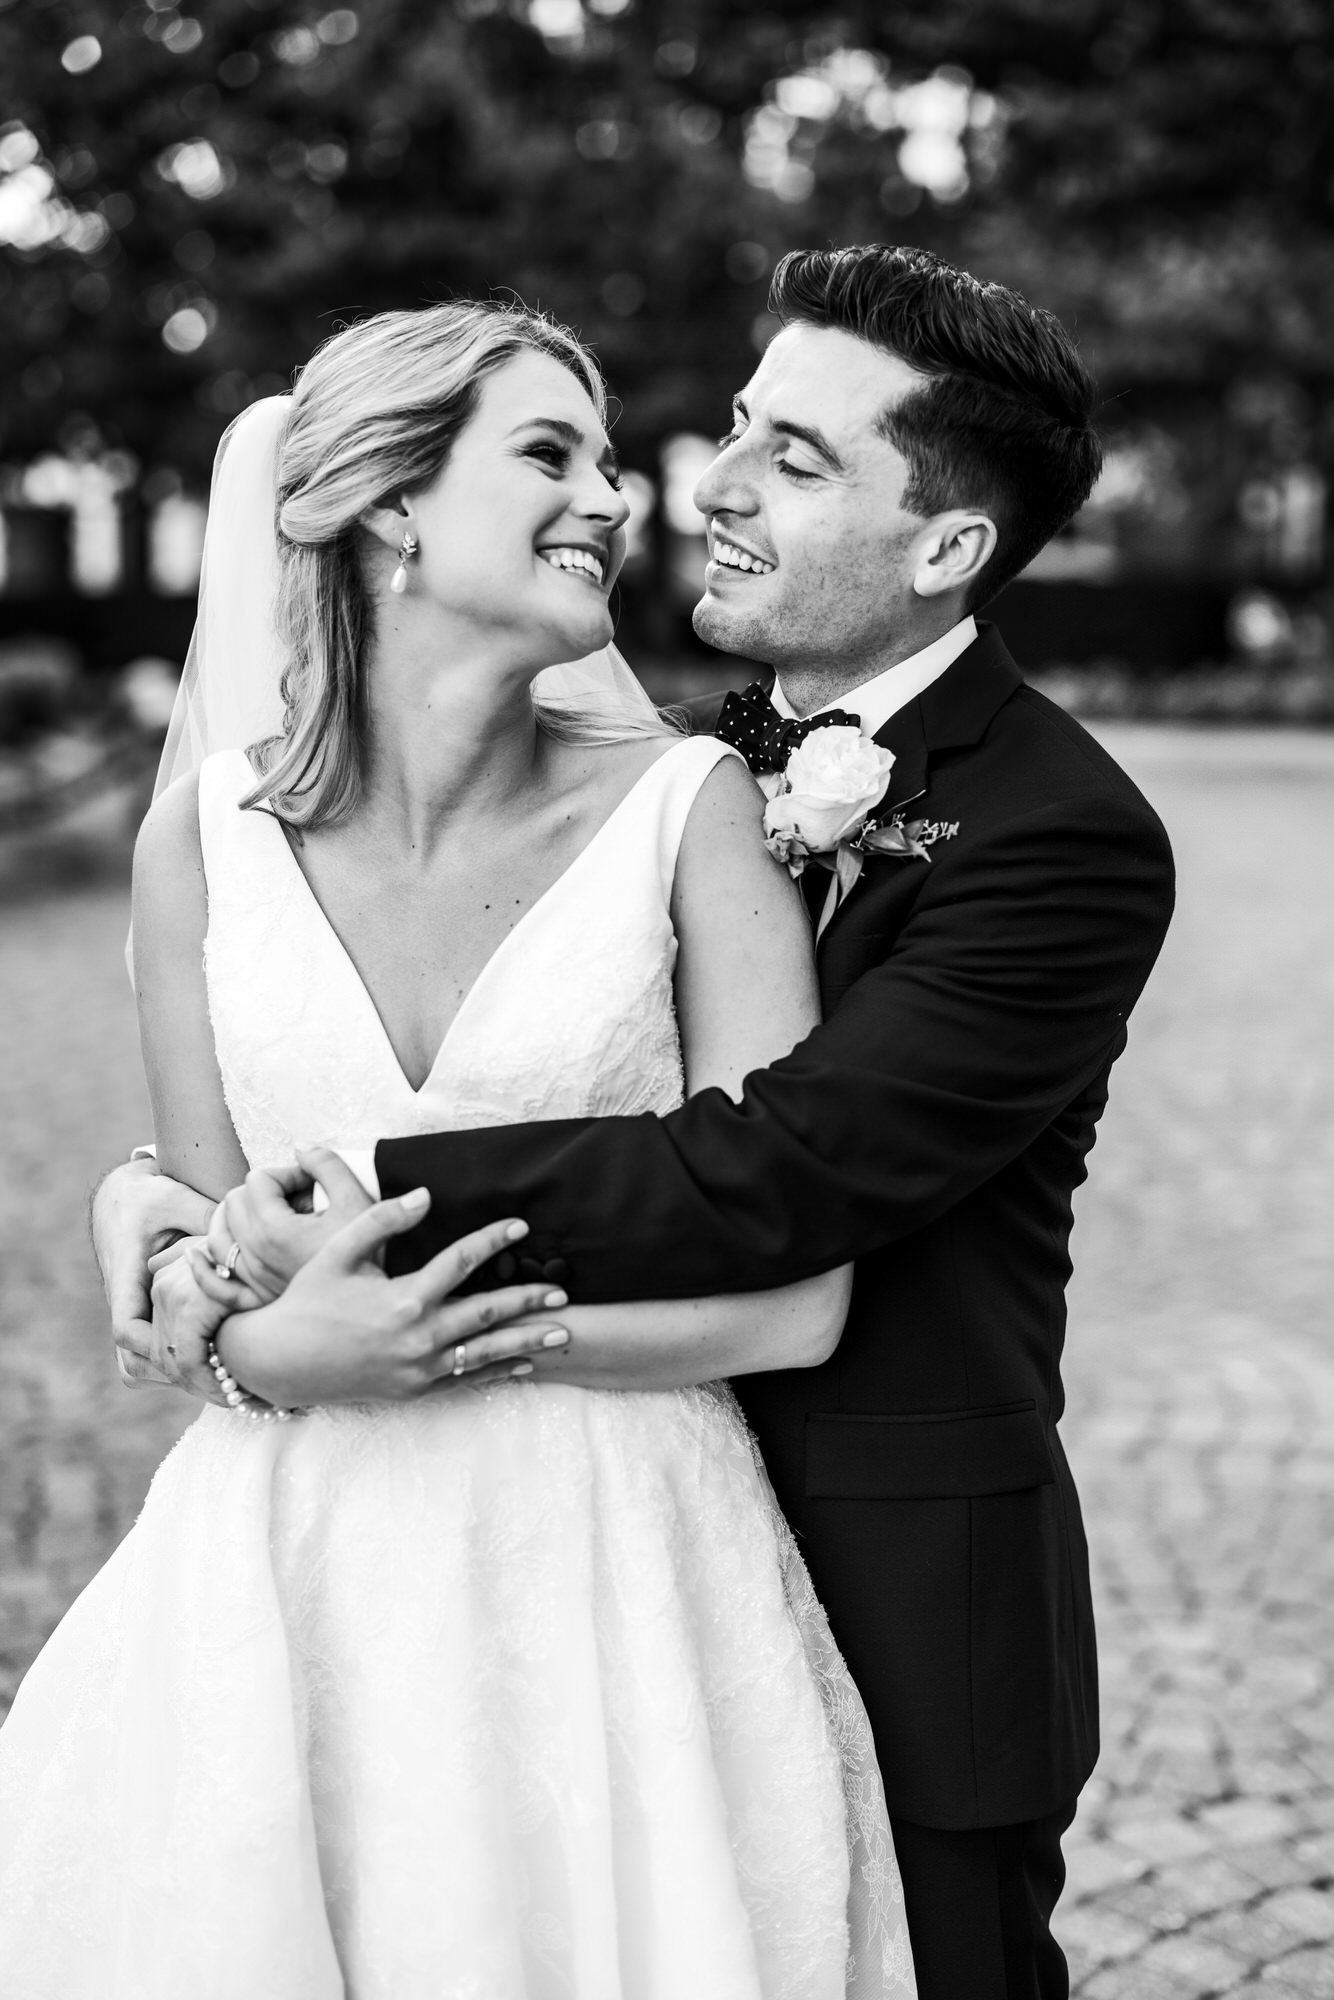 man and woman smiling at one another after wedding